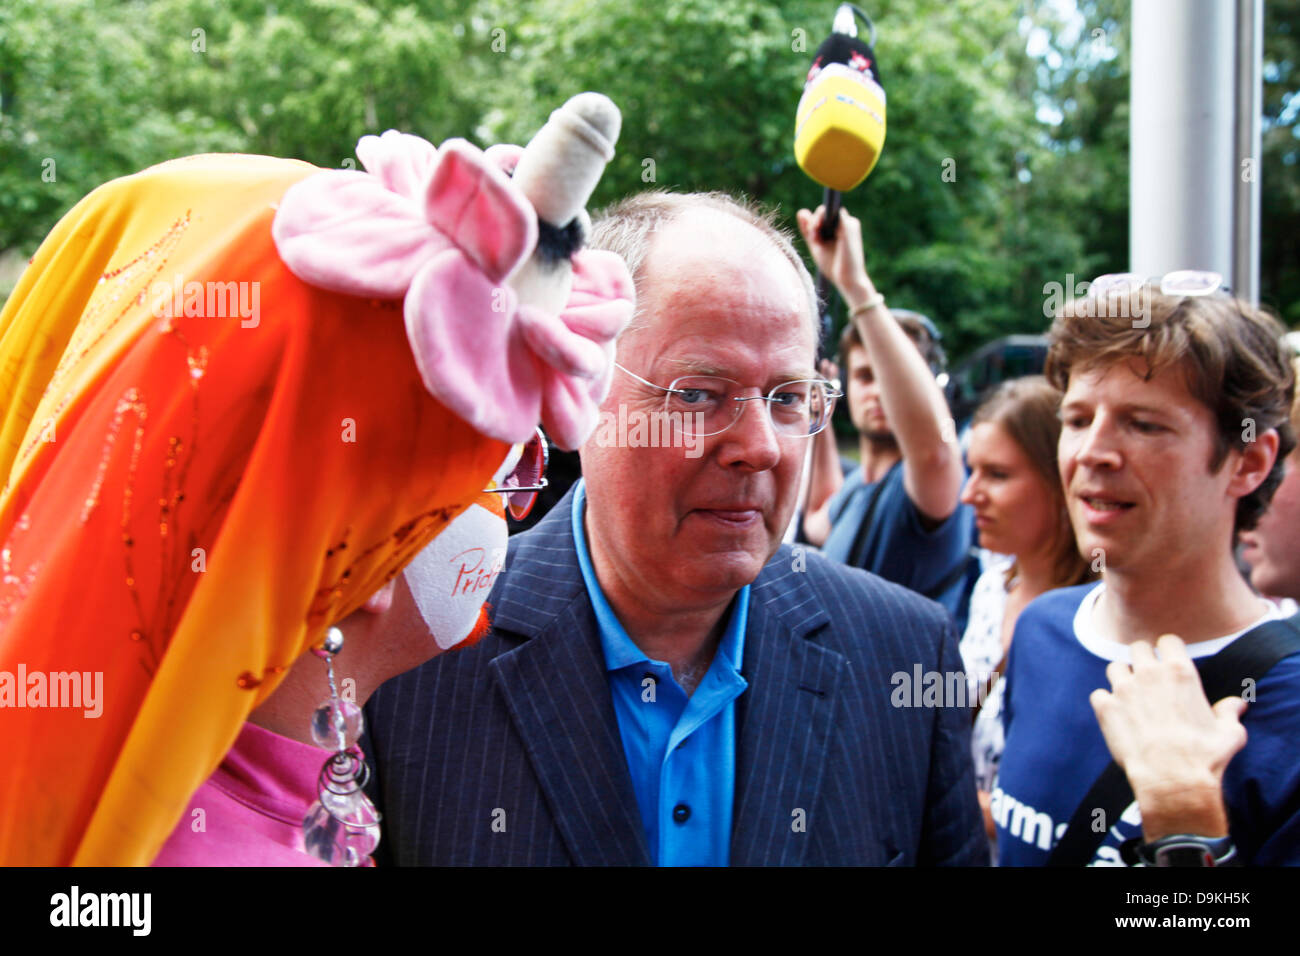 Germany, Berlin. 21th Juni, 2013. Peer Steinbrück, SPD chancellor candidate for the elections of 2013, hoist the rainbow flag, as tradition, during the CSD reception of Schwusos one day before Christopher-Street-Day-Parade in front of the Willy-Brandt-Haus in Berlin. Picture: Peer Steinbr?ck, SPD chancellor candidate, after hoisting of the rainbow flag at Willy-Brandt-Haus in Berlin. Stock Photo